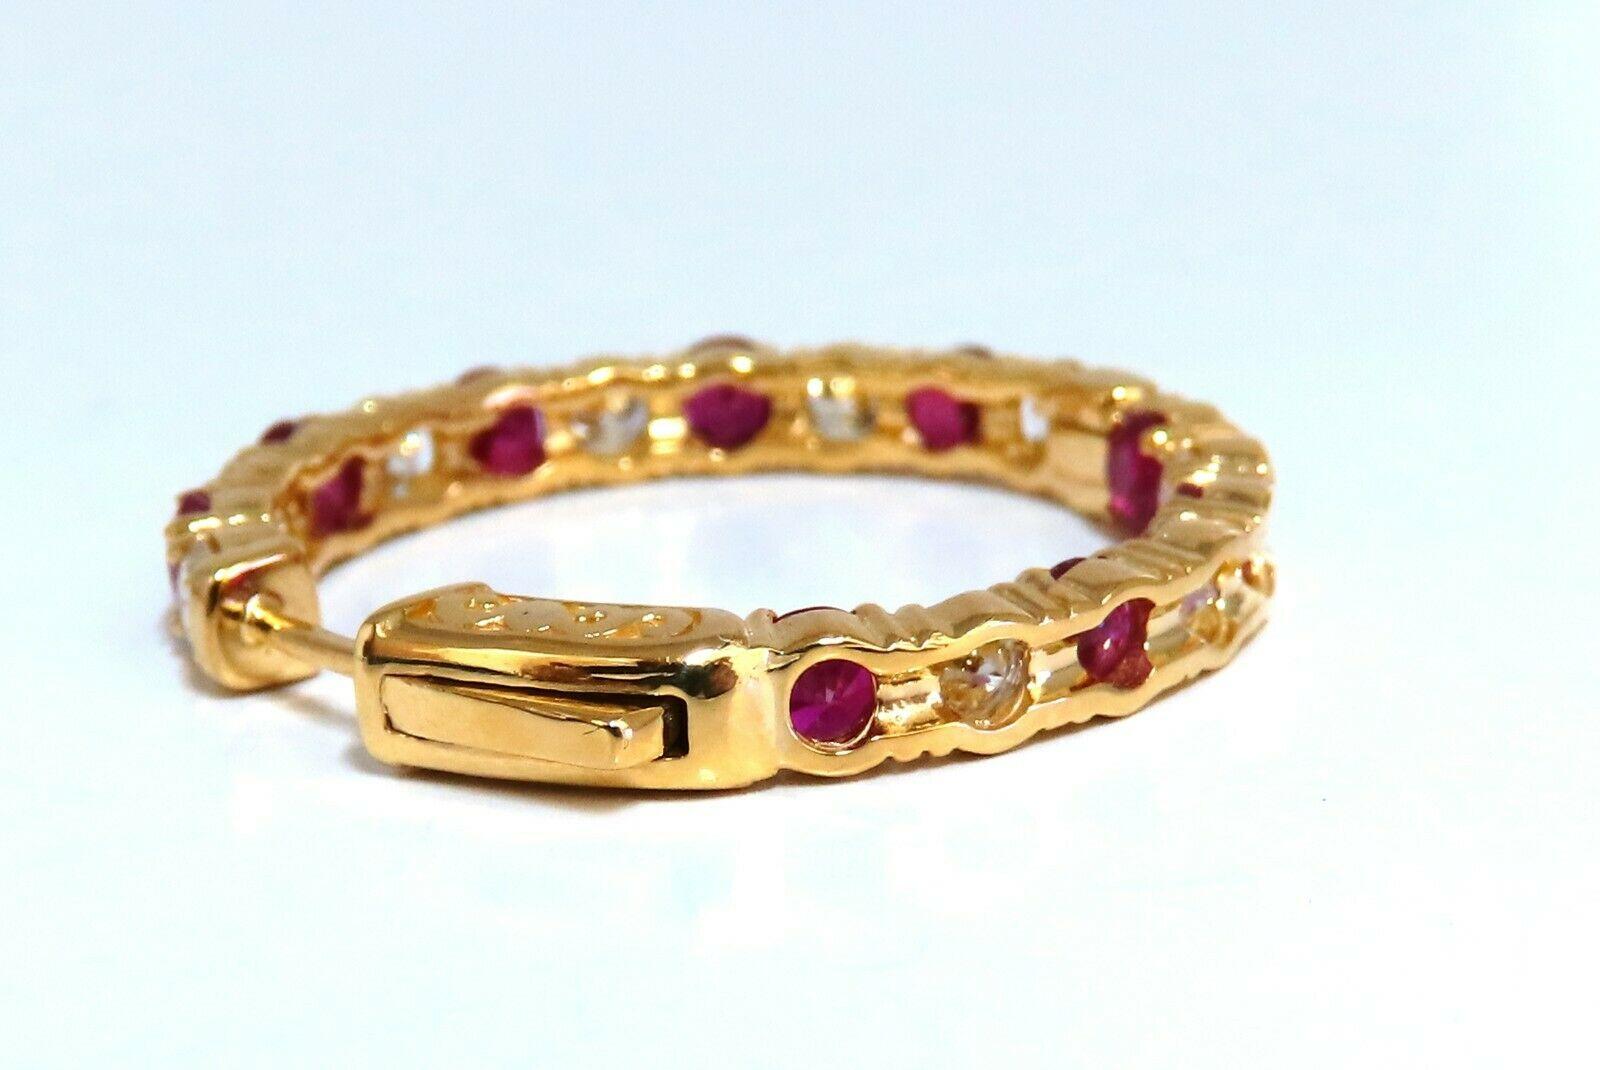 7.19ct Natural Ruby Diamonds Hoop Earrings 14kt Yellow Gold Inside Out For Sale 1